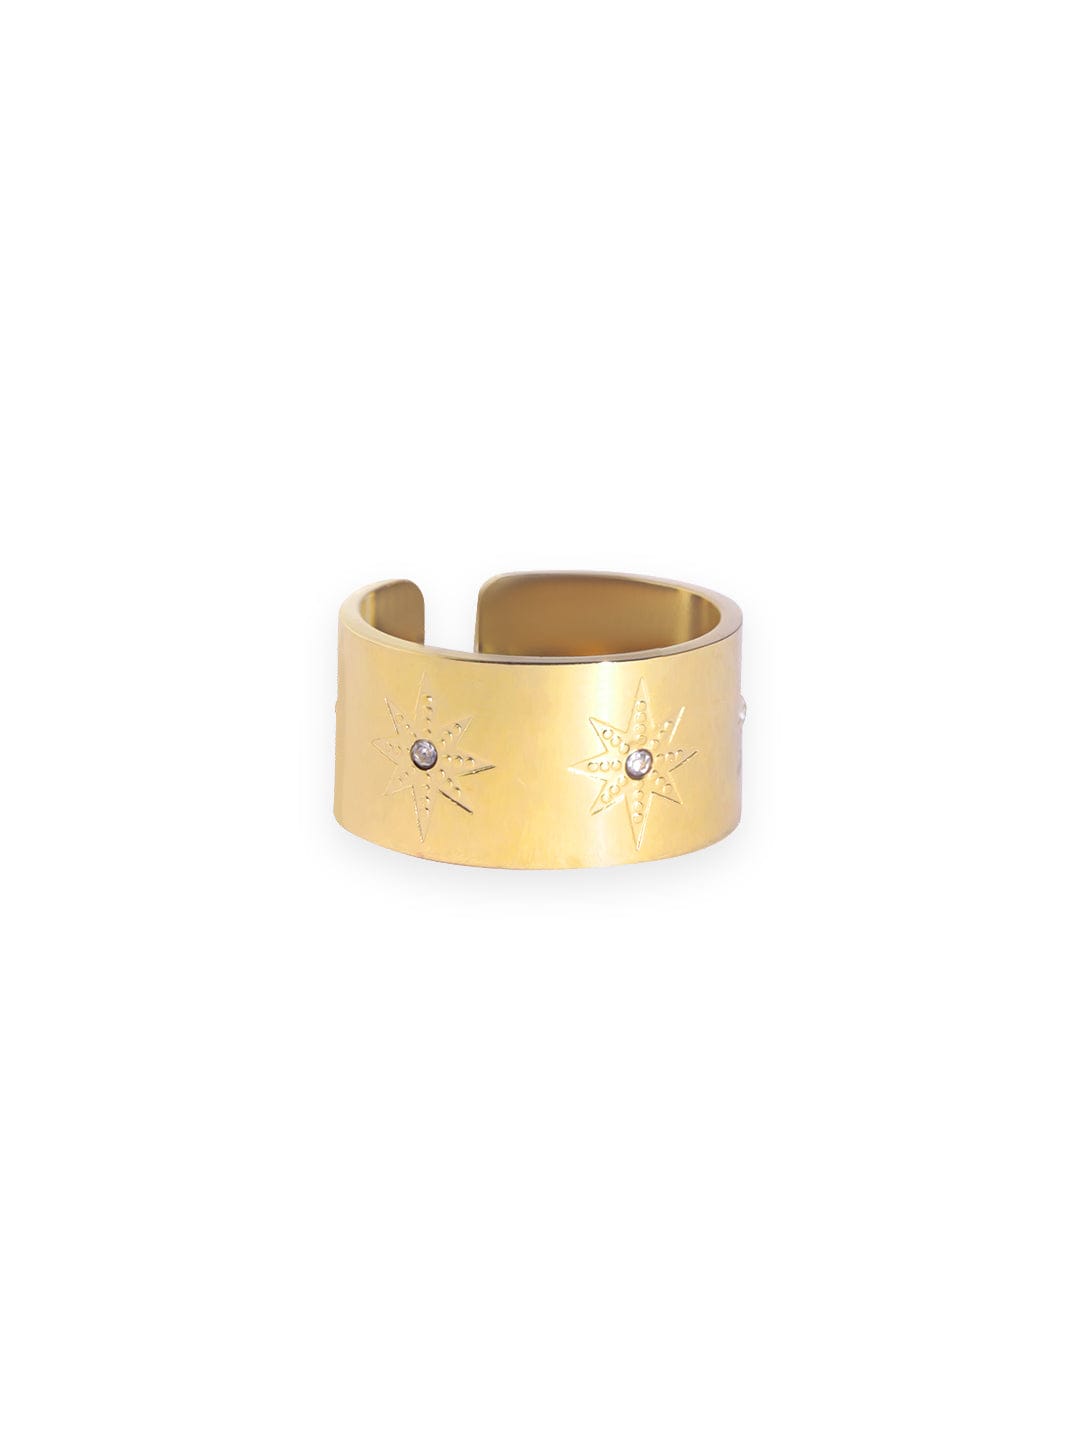 6165 - Ring - Gold Eye with White Topaz - Adjustable Size - 18K Gold Plated  Brass - Satya - Twisted Thistle Apothecary